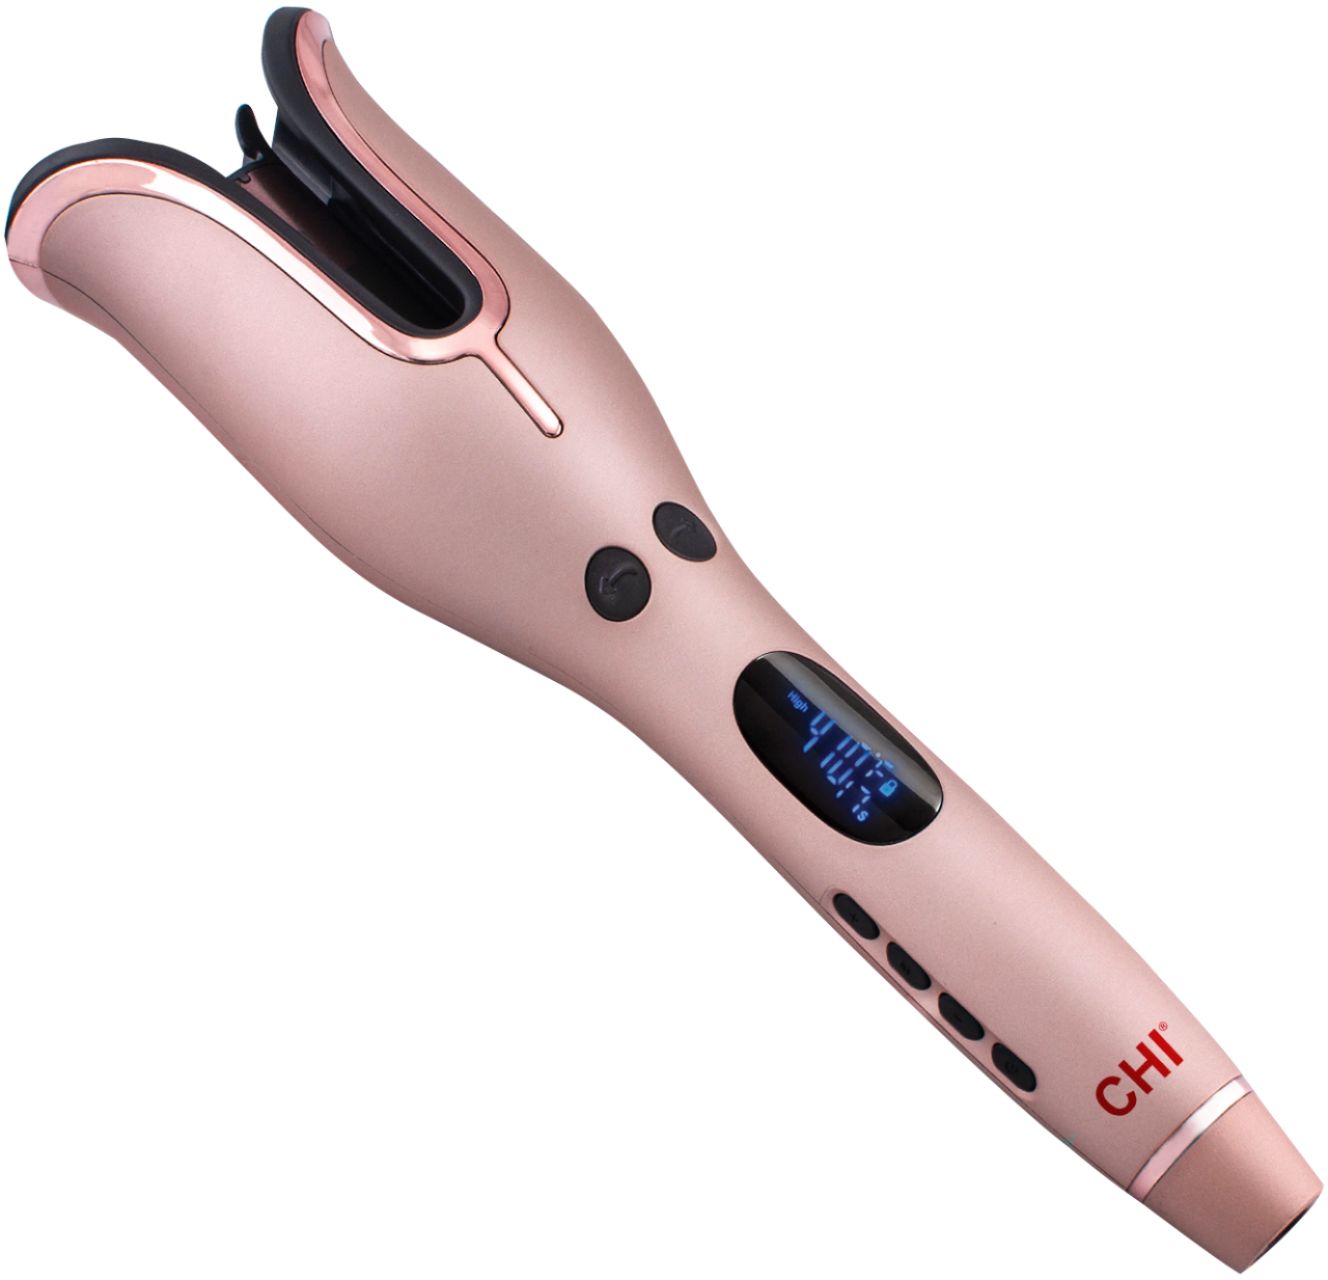 CHI - Spin n Curl Ceramic 1” Curling Iron - Rose Gold